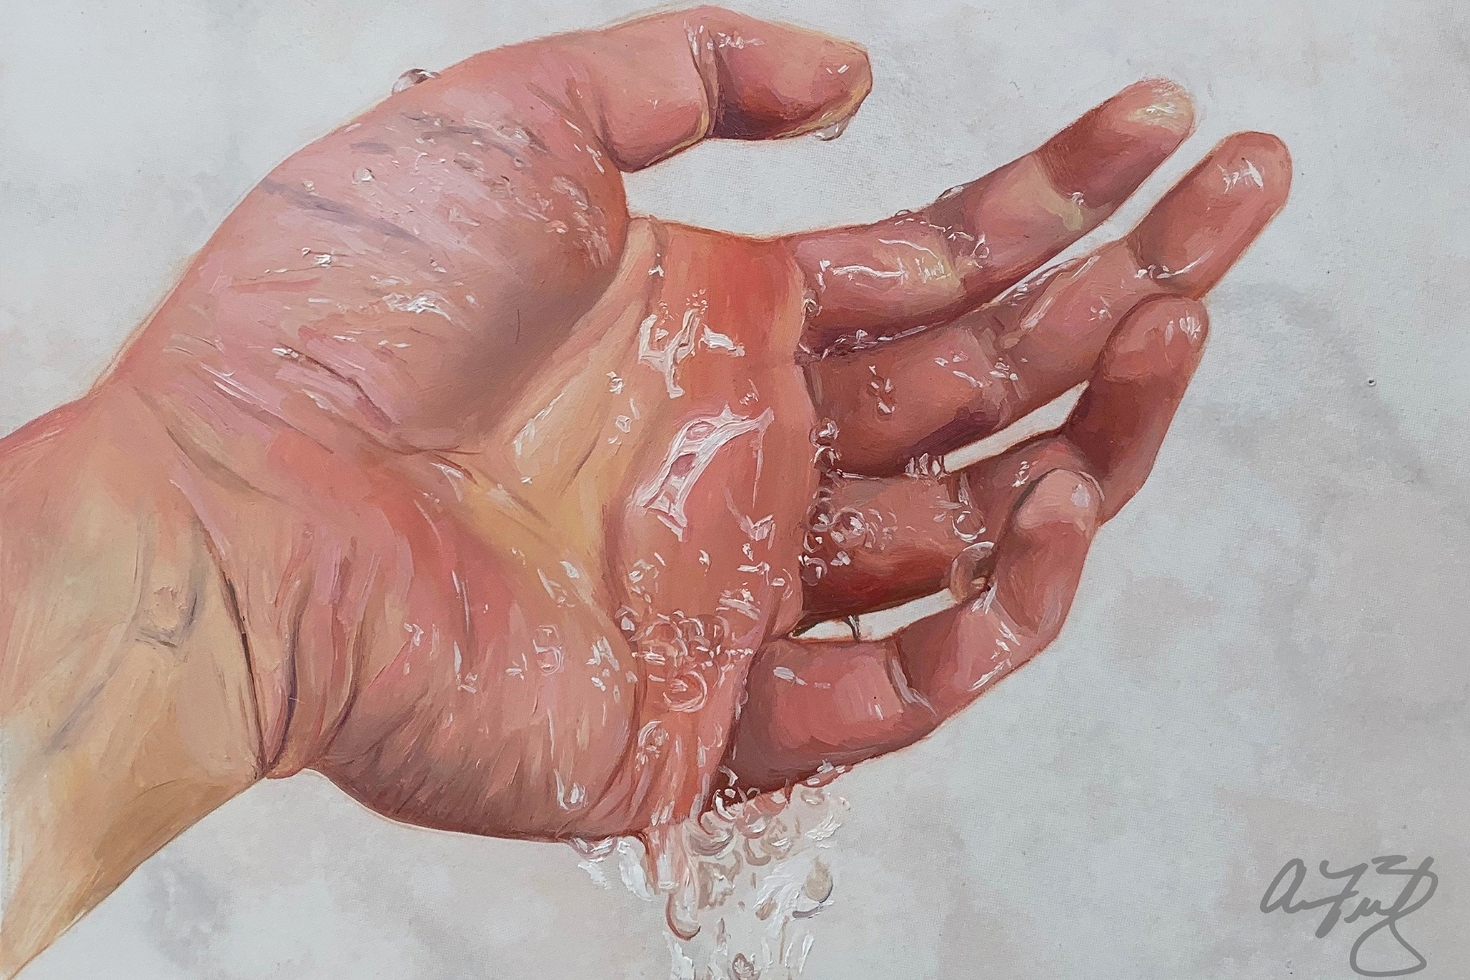 Painting of a hand with water